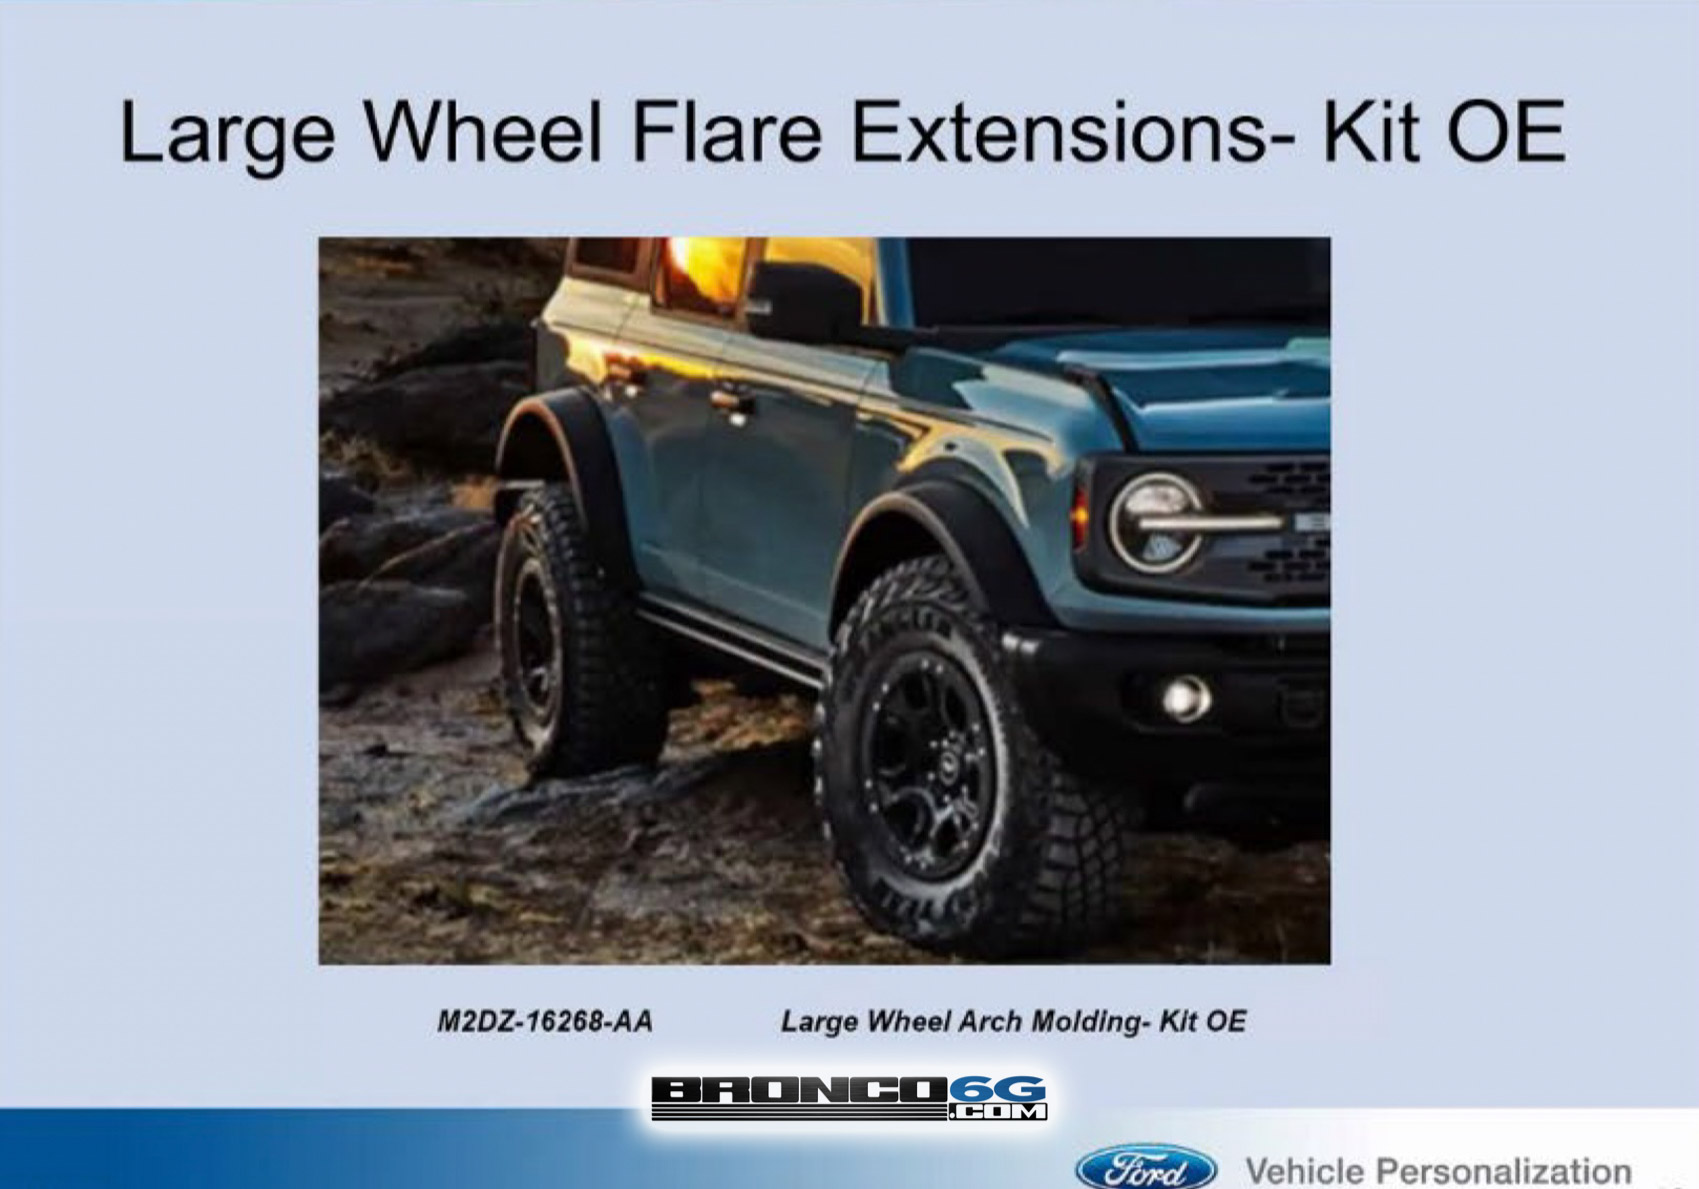 2021 Bronco Large Wheel Flare Extensions Kit Ford Performance OEM factory accessory.jpg